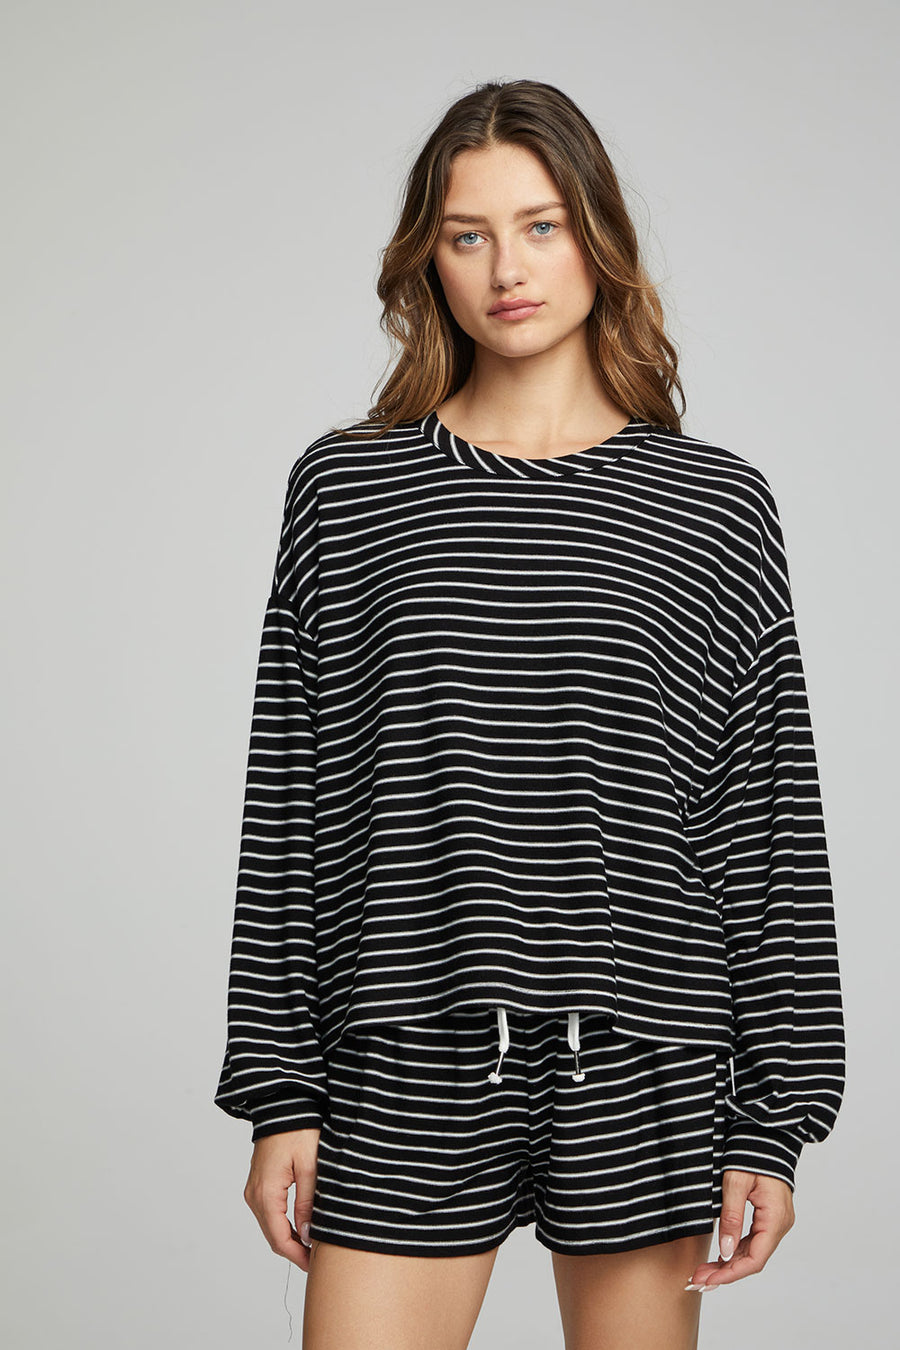 Lesh Long Sleeve - Black and White Stripe WOMENS chaserbrand